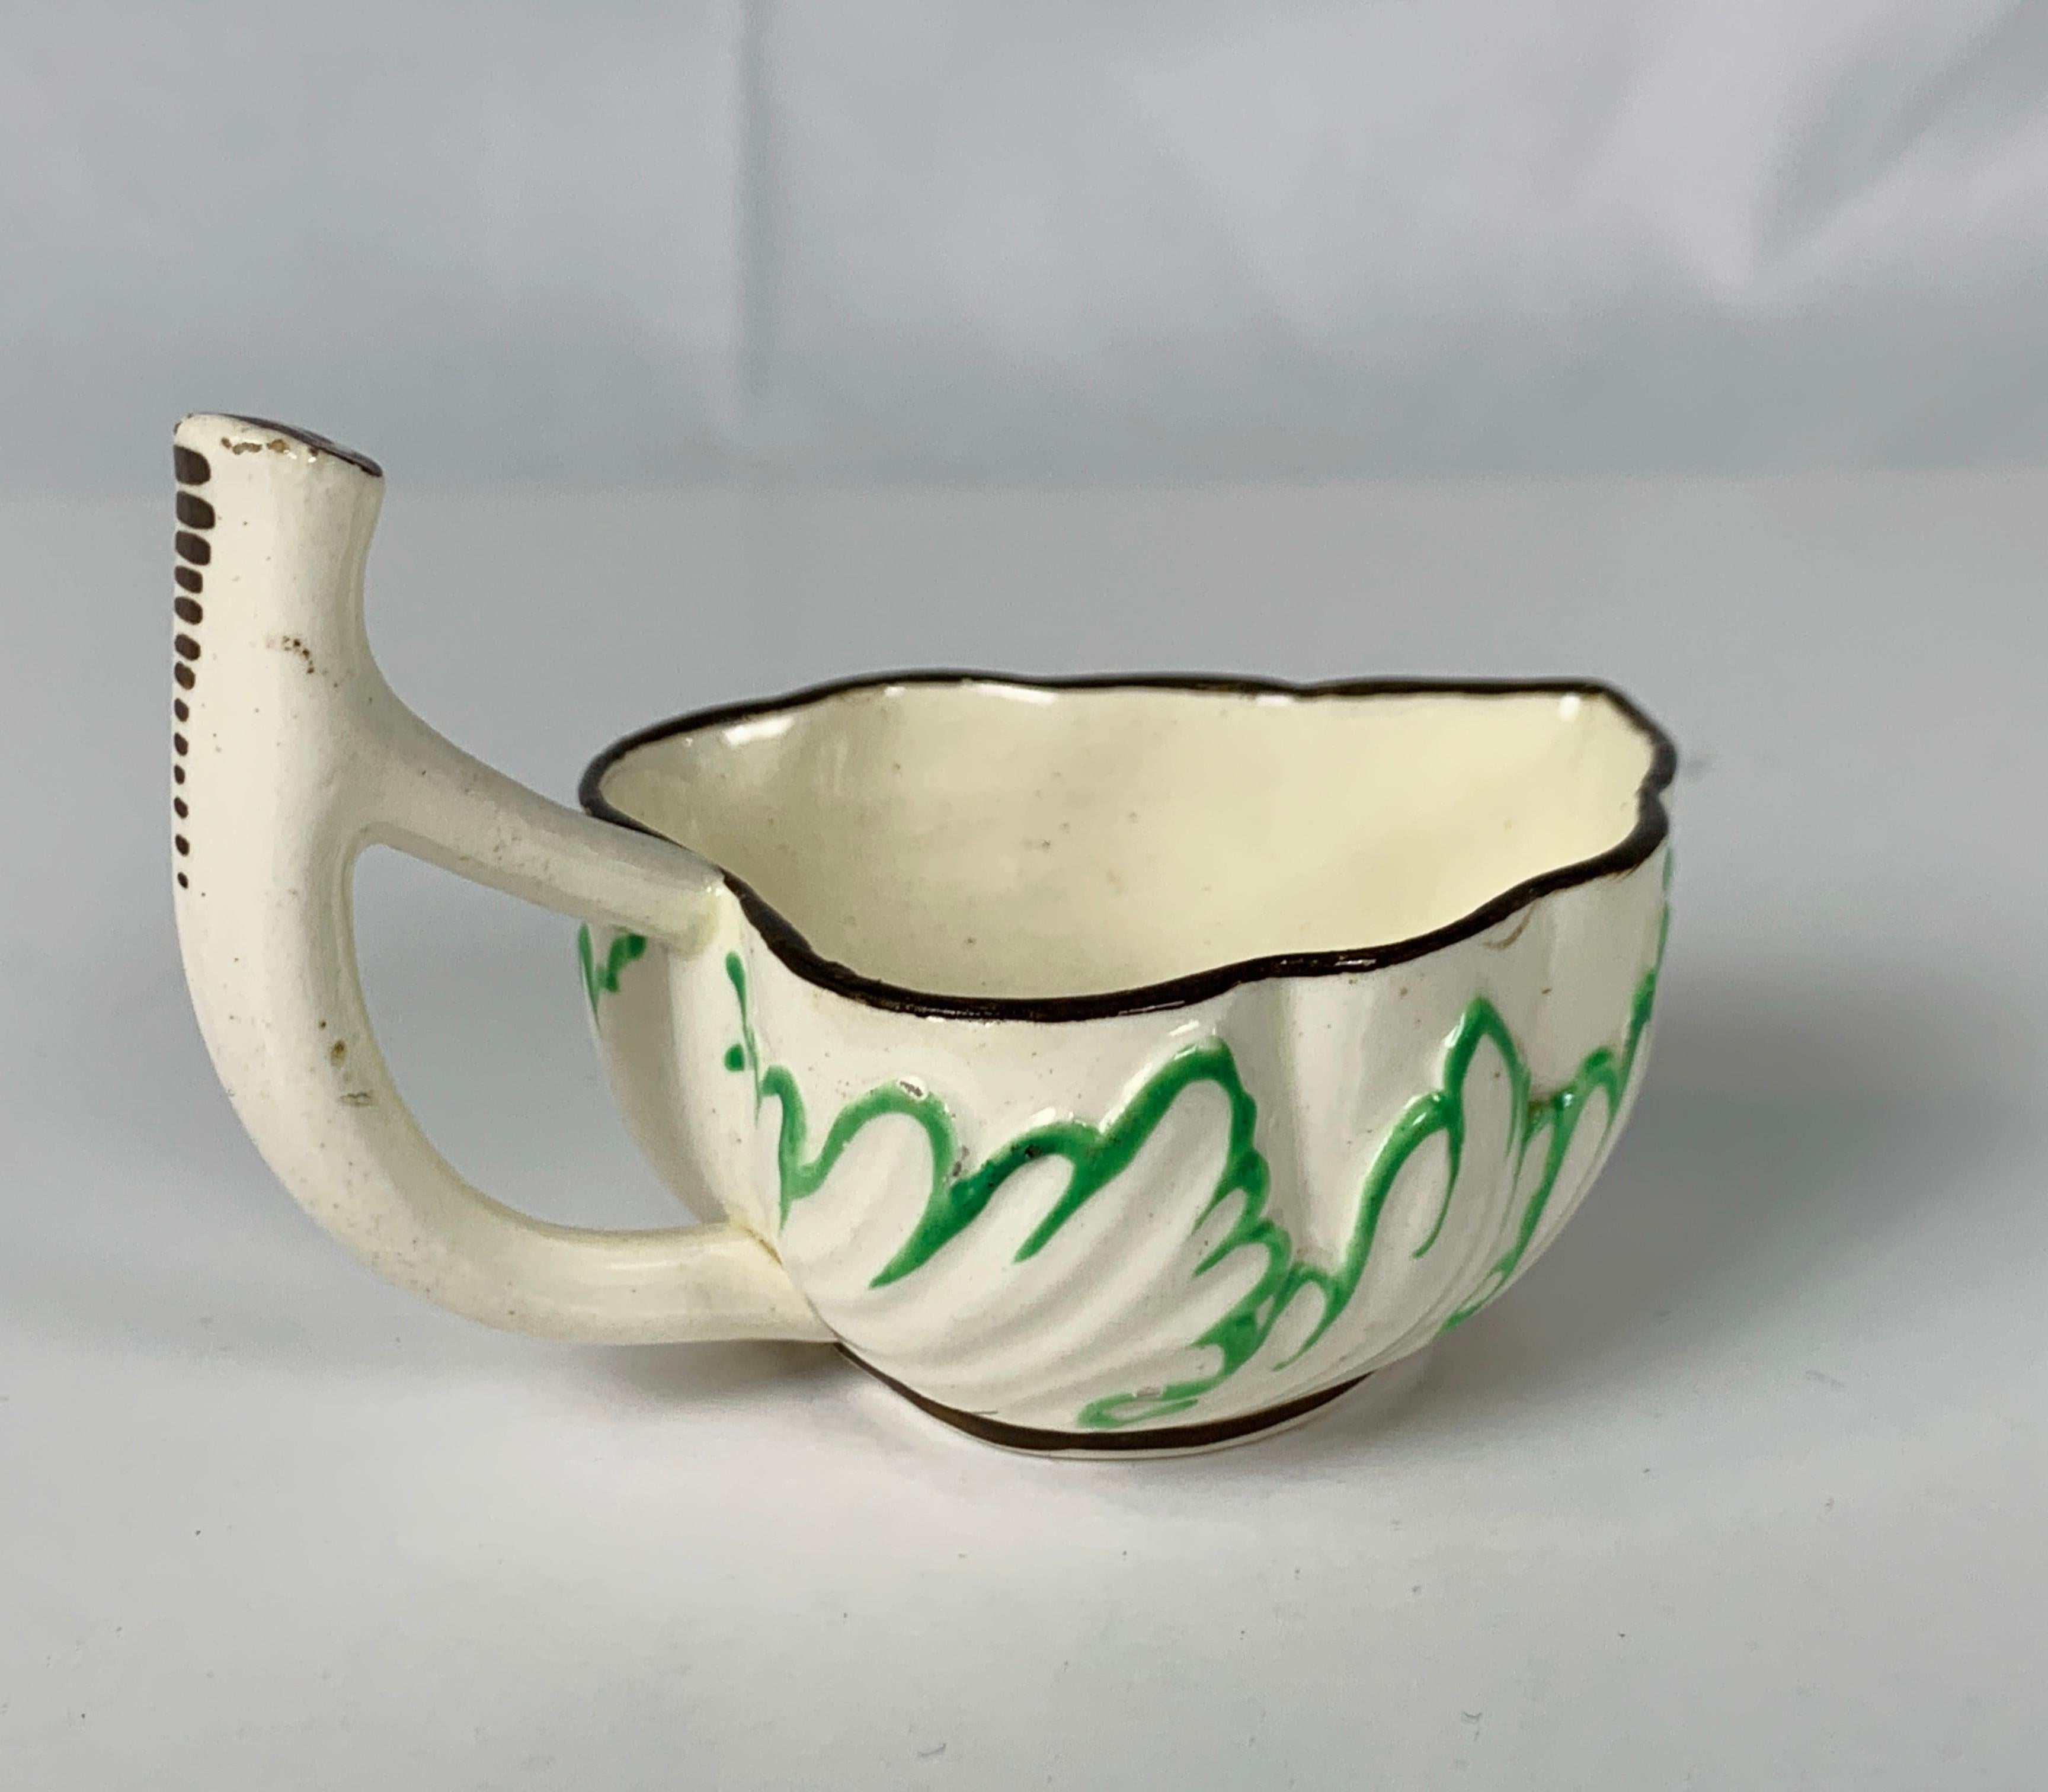 Provenance: The Private Collection of Mario Buatta, a creamware sweetmeat made in England circa 1790 with an impressed floral design outlined in lime green.
This sweetmeat might have been the odd part of a set which Mario purchased for a